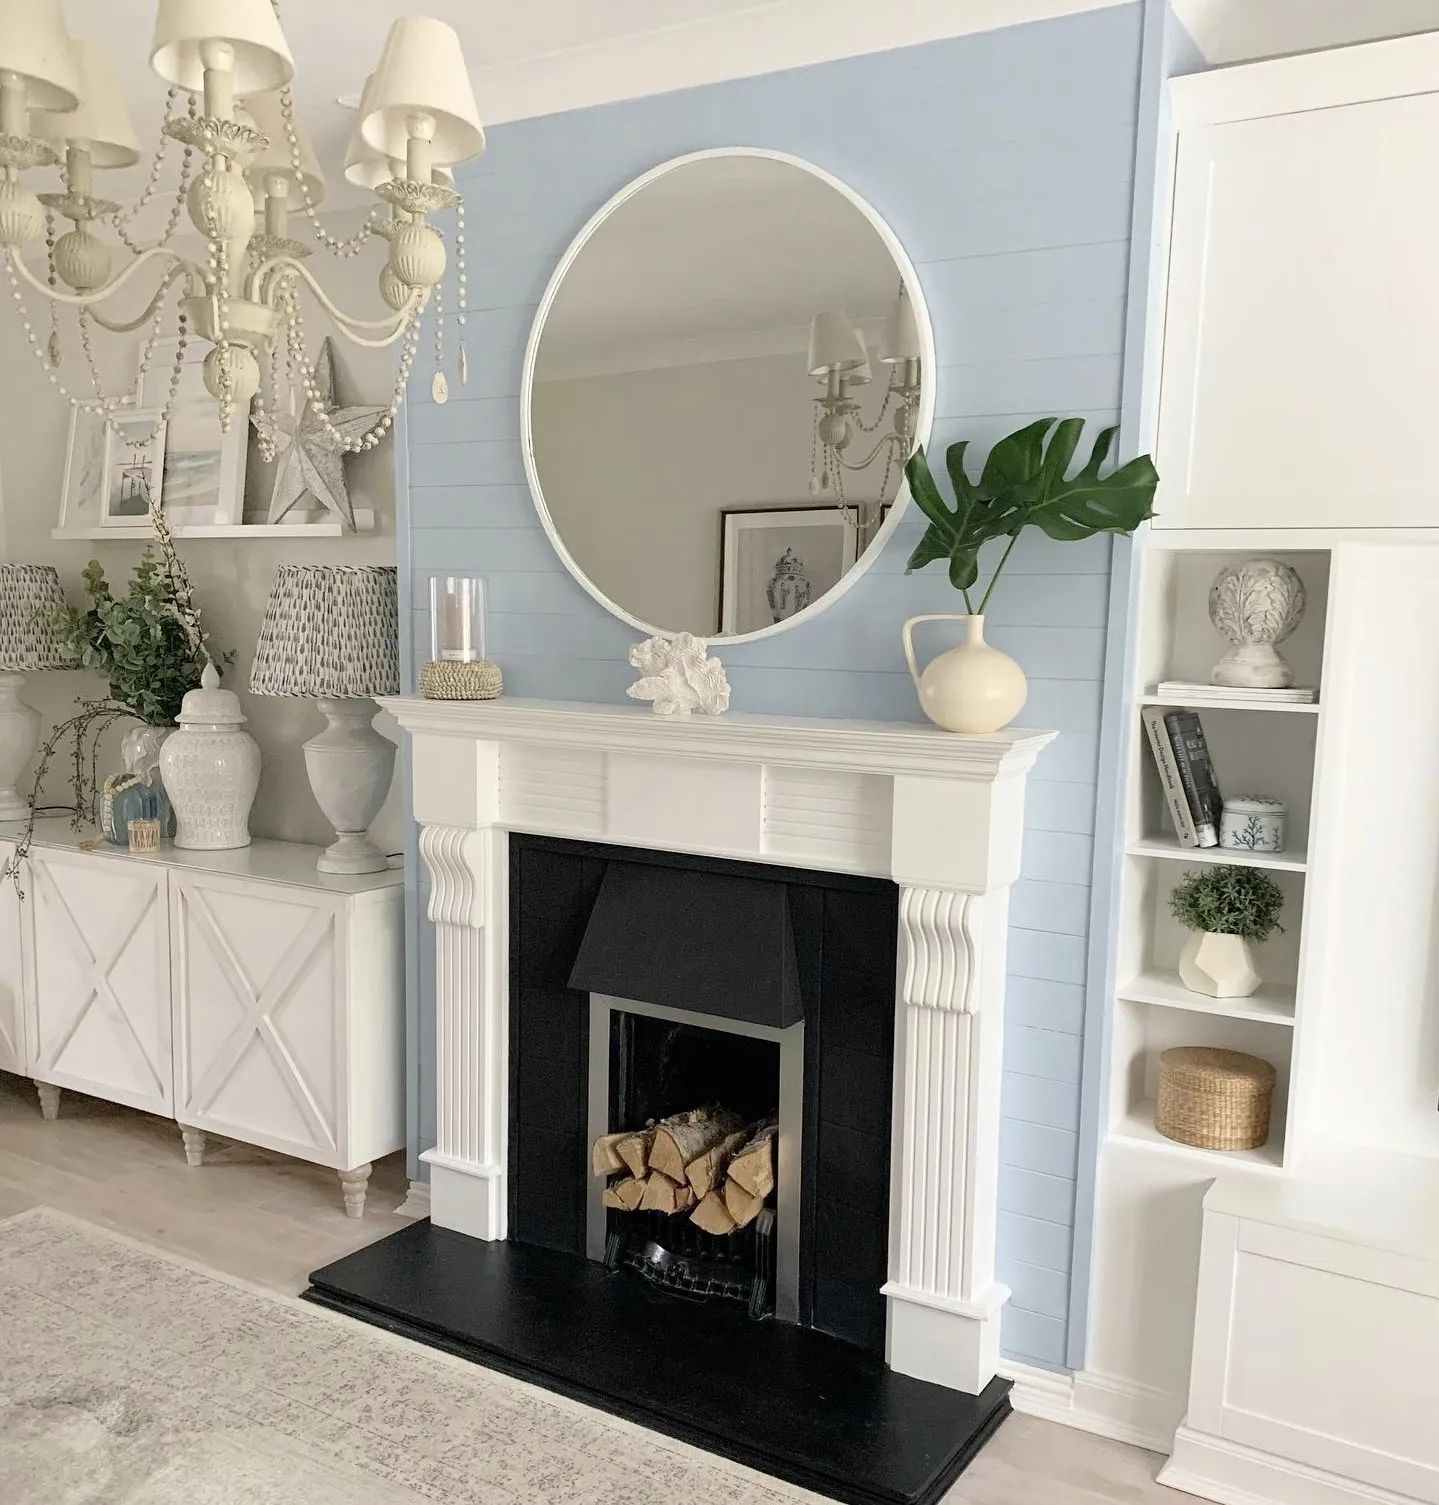 Andrea @dreah.home used the @duluxirl Let's Chat Colour free colour consultation service for advice on this beautiful living room design.

Dulux Interior Designer @hollyevebryan recommended 🎨Blue Ribbon from the @duluxheritageireland Collection and we think it's absolutely stunning!